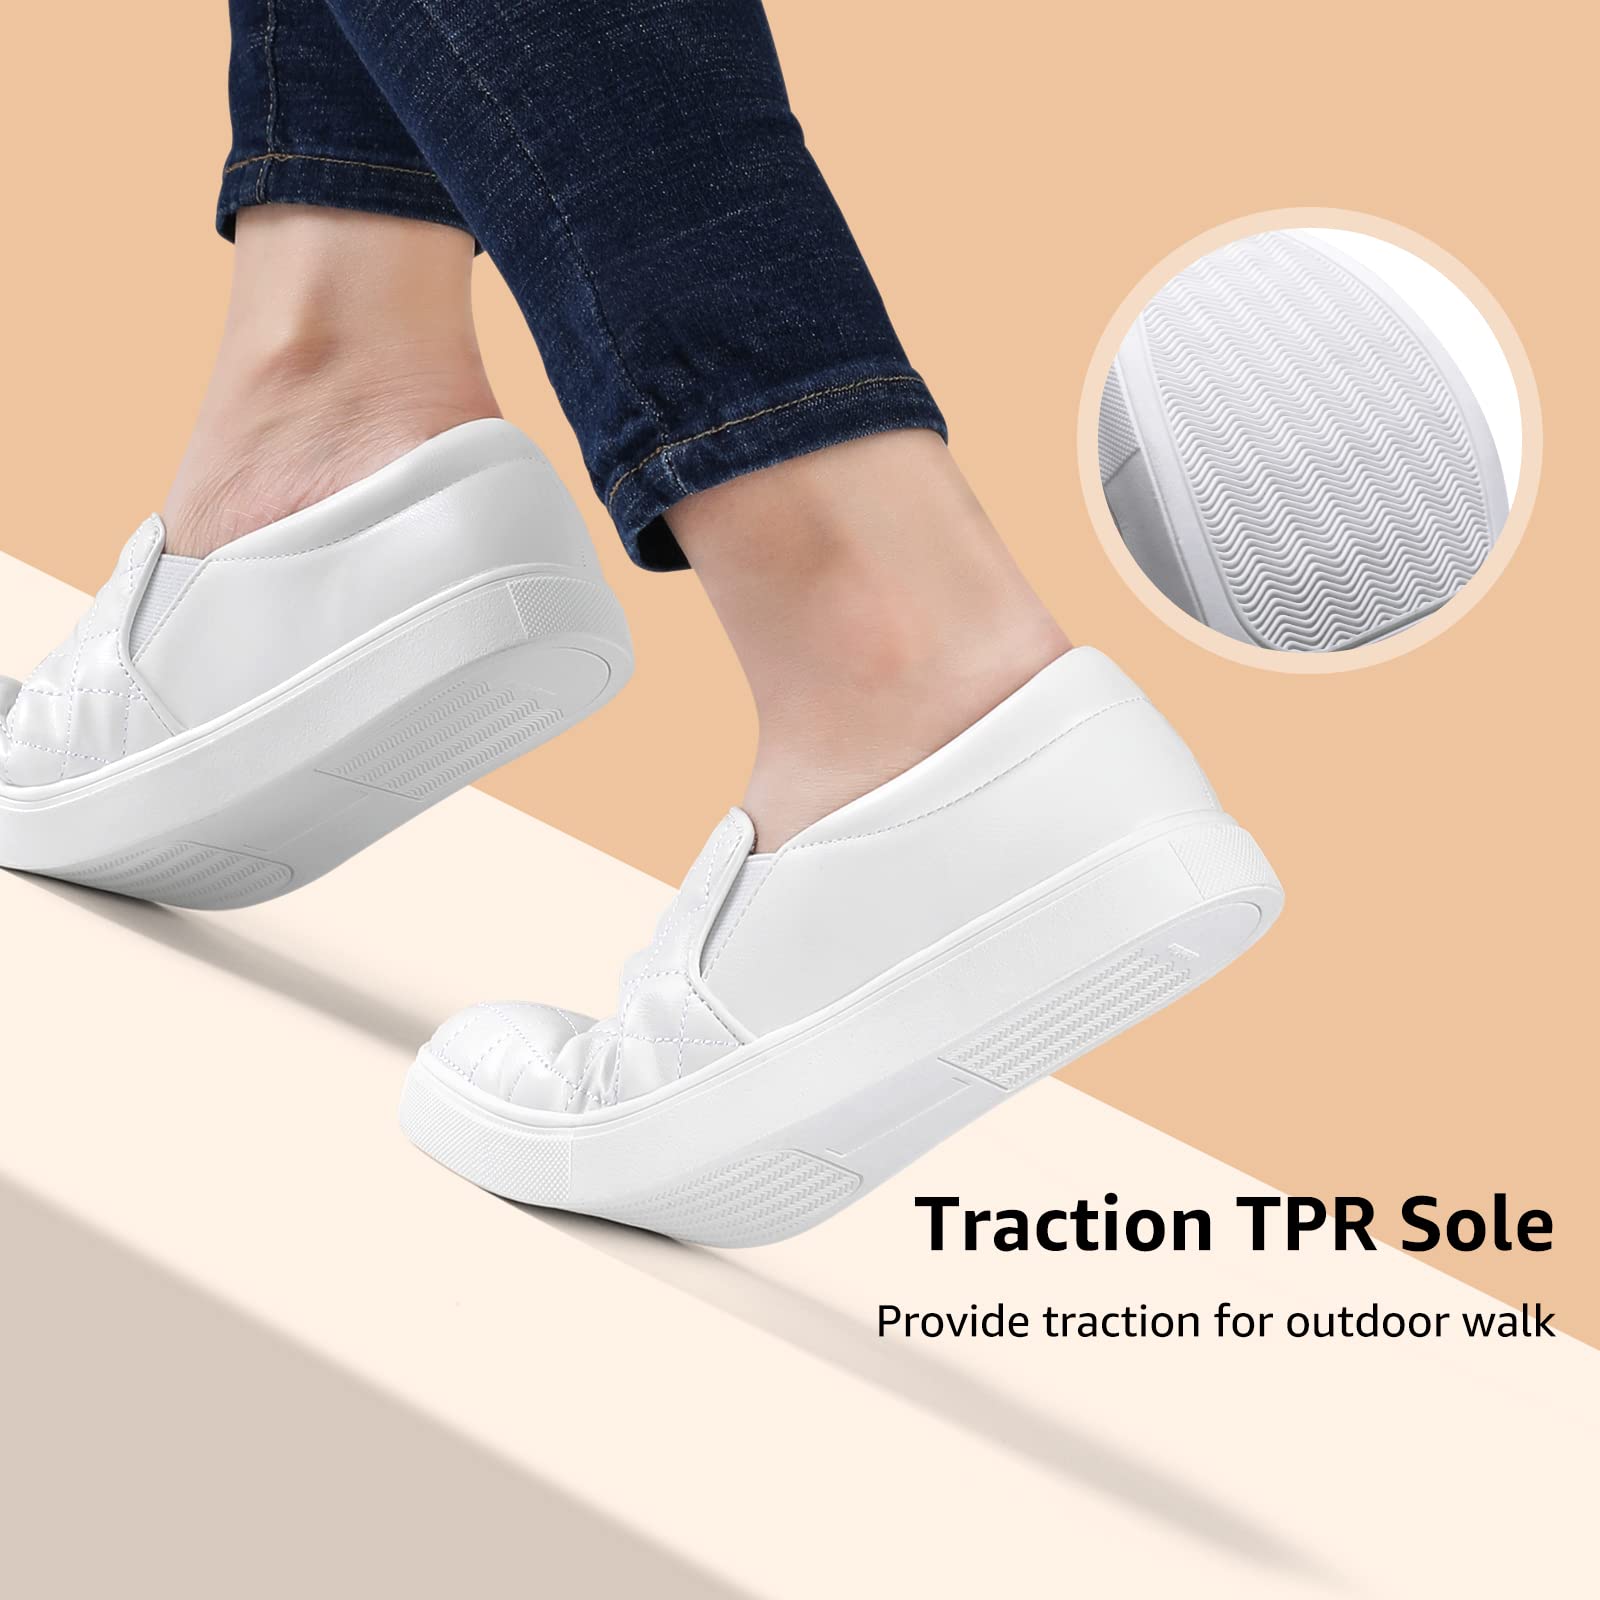 STQ White Sneakers for Women Slip On Tennis Shoes Comfortable Lightweight Nursing Shoes Fashion Sneakers for Teacher White Floral Size 8.5